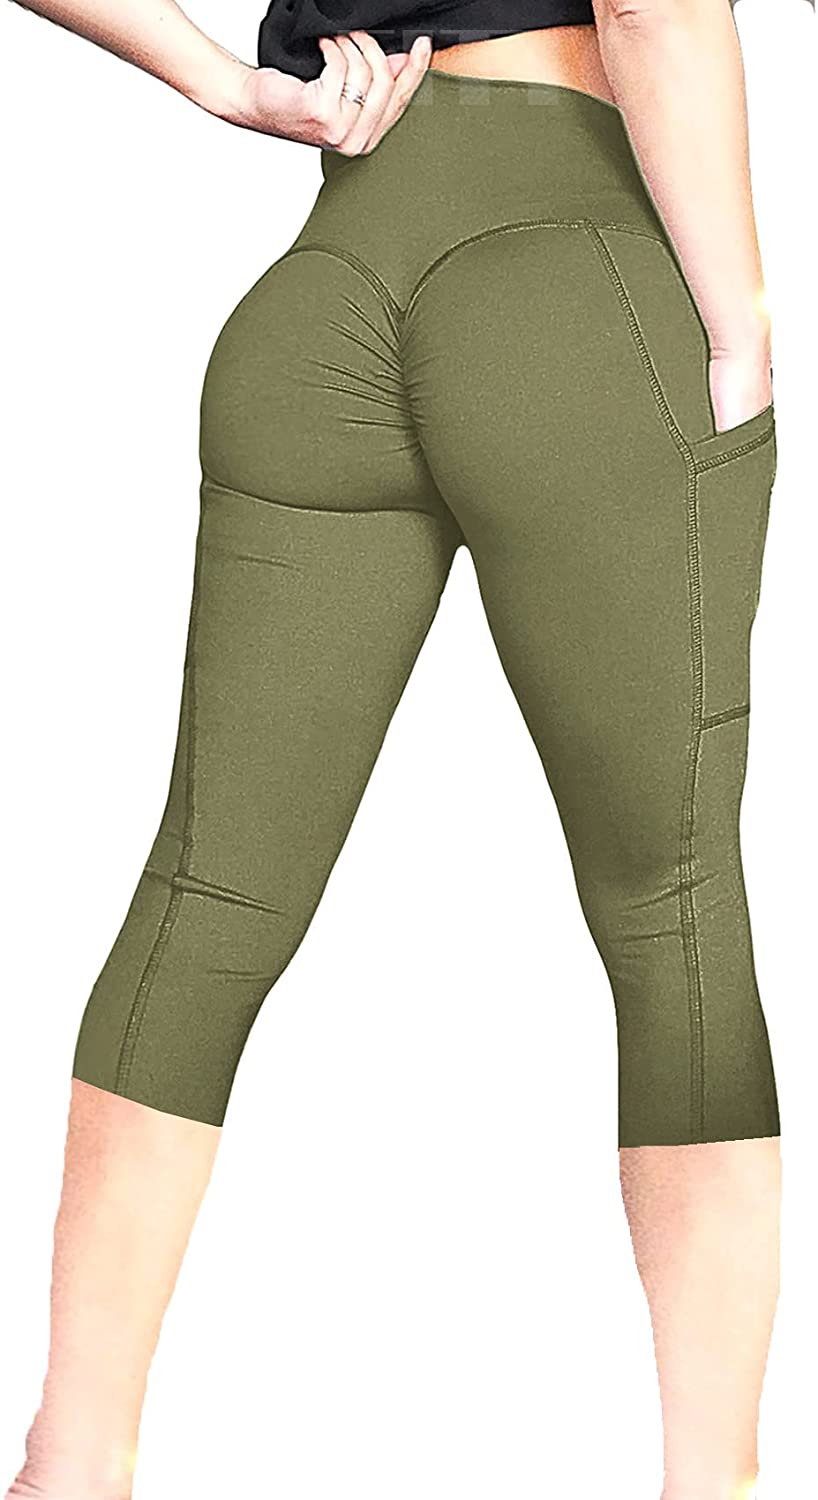 Sexy Ruched Butt Lift Yogalicious Leggings With Pockets For Women Anti  Cellulite Fitness Pants For Gym, Workout, And Sports Push Up Tights Q231104  From Ccawda, $5.77